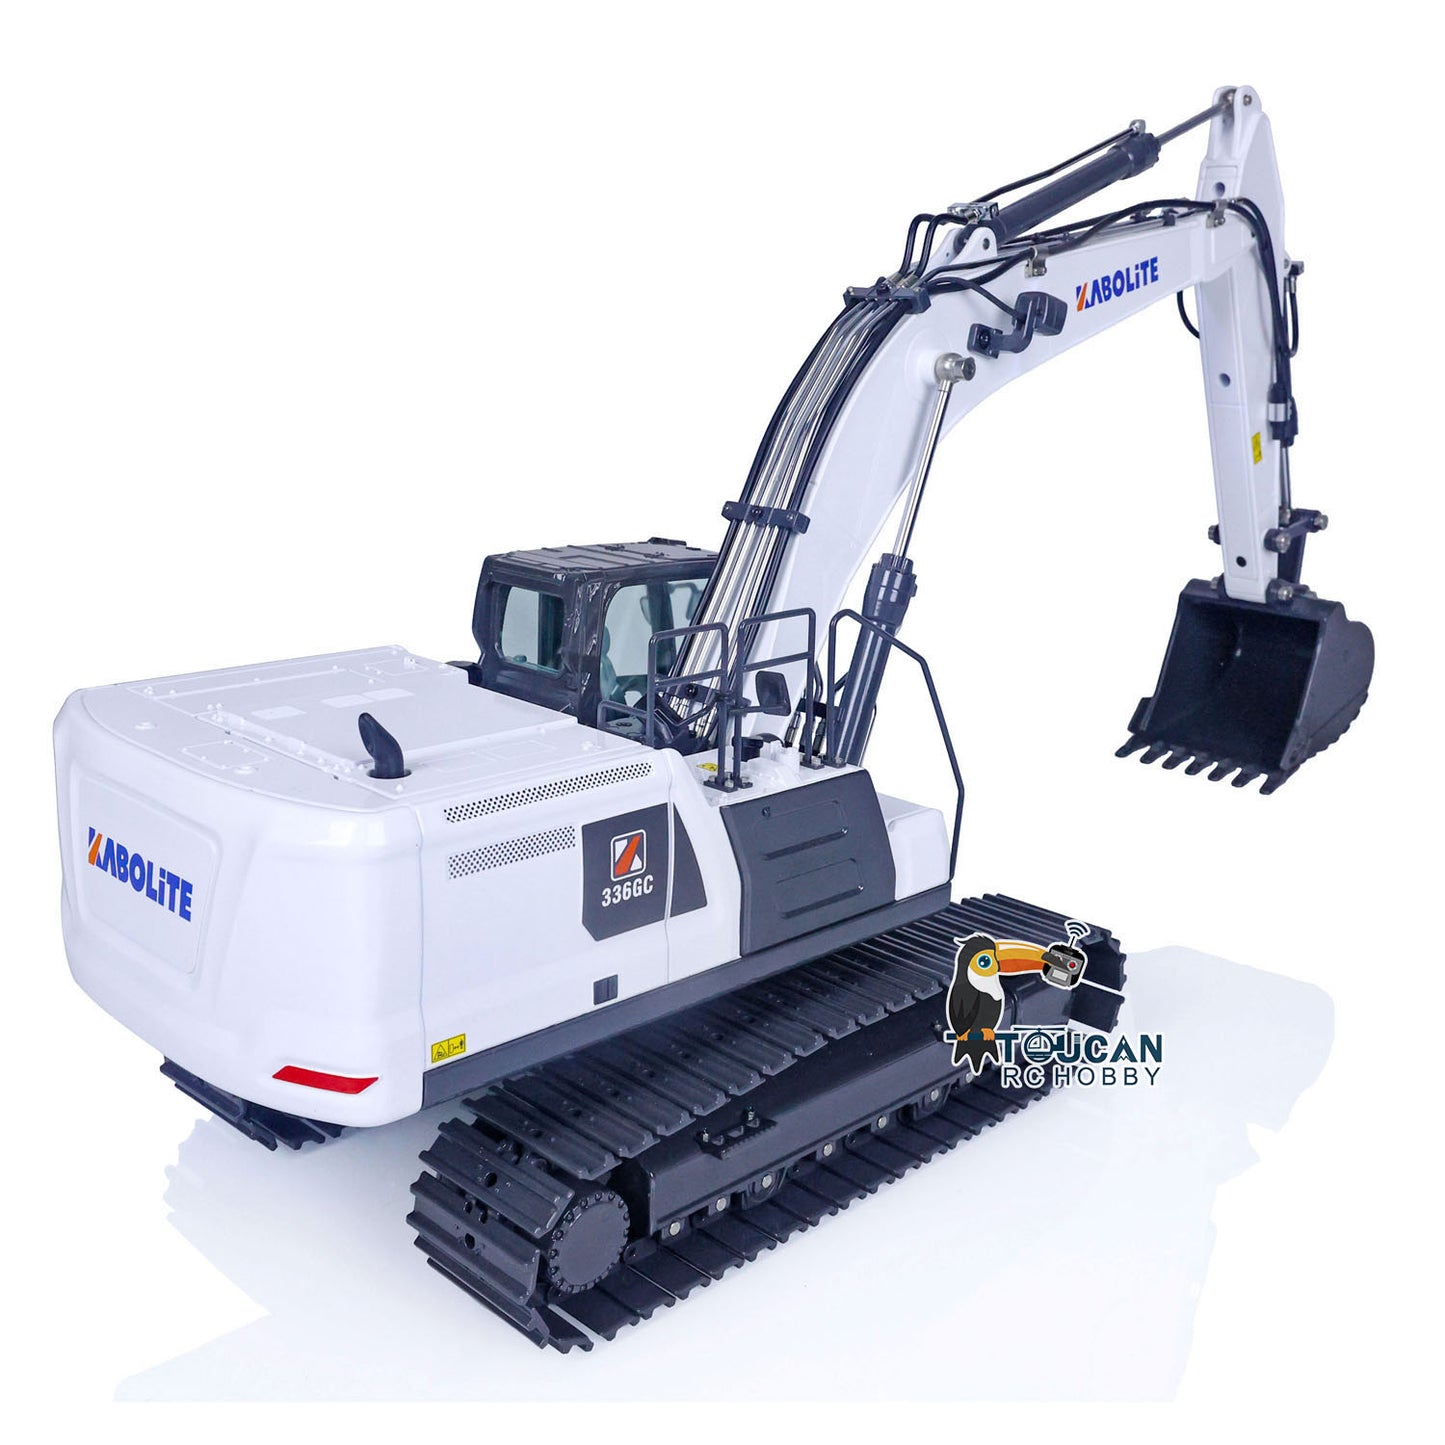 Kabolite K961 100 1/18 Hydraulic Remote Control Excavator RTR RC Digger DIY RTR Model Painted Assembled Standard Version